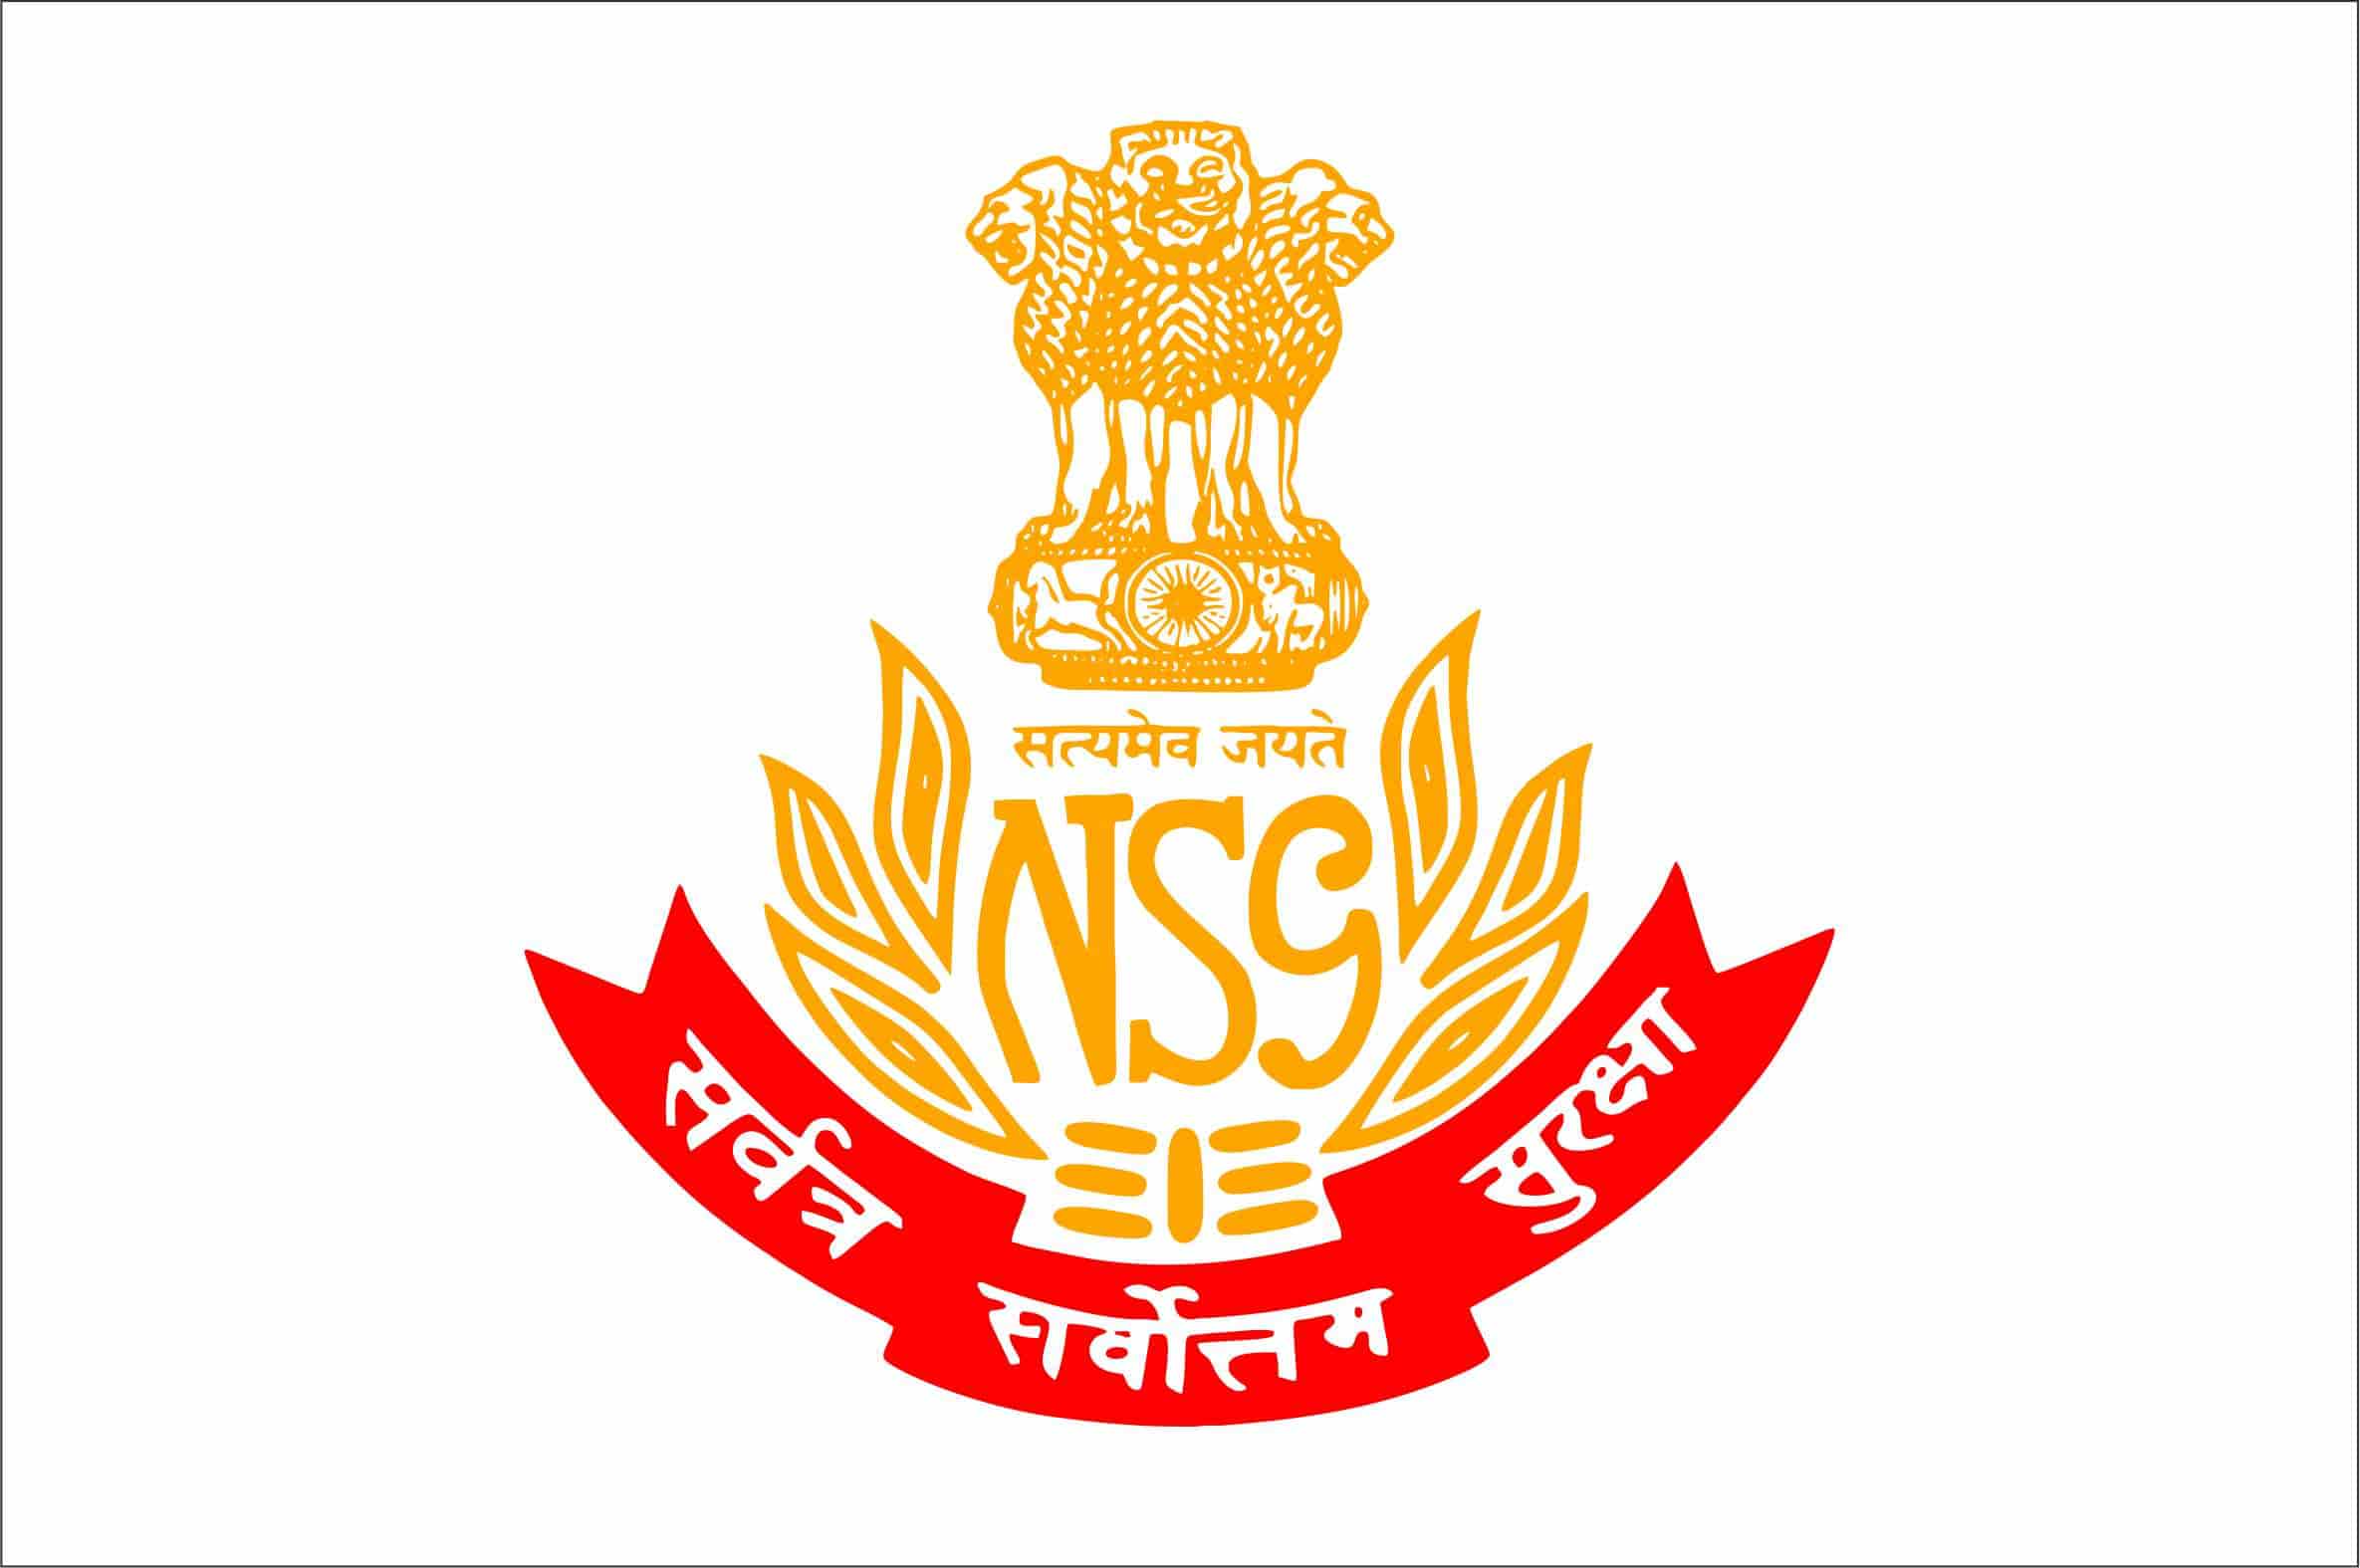 National Security Guard (NSG) All India Car Rally 'Sudarshan Bharat  Parikrama' marking country's 'Amrit Mahotsav of Independence' reached  Jamshedpur on Friday evening and flagged off from Jamshedpur on Saturday  morning for Kolkata.